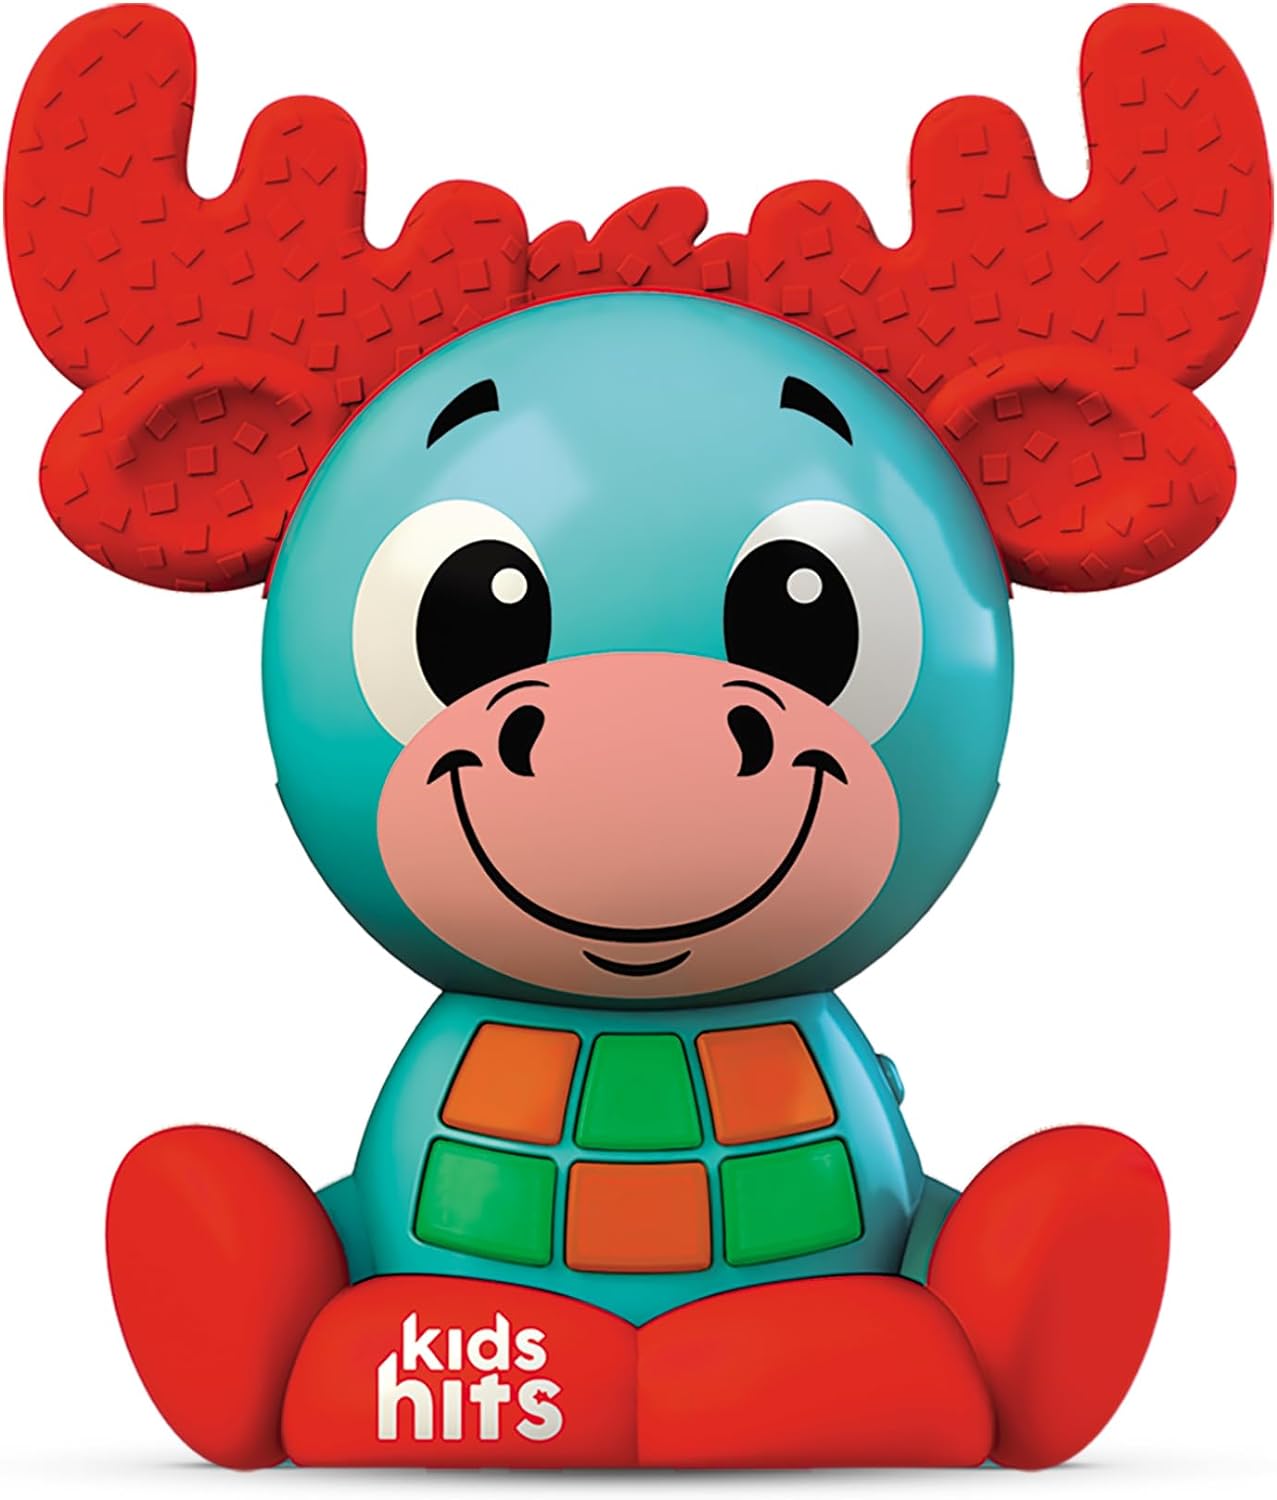 Kids Hits Babykins Moose Interactive Toy Spark Joy and Learning for Kids 2 Years and Up - Bright Lights, Playful Tunes, and Educational Fun!